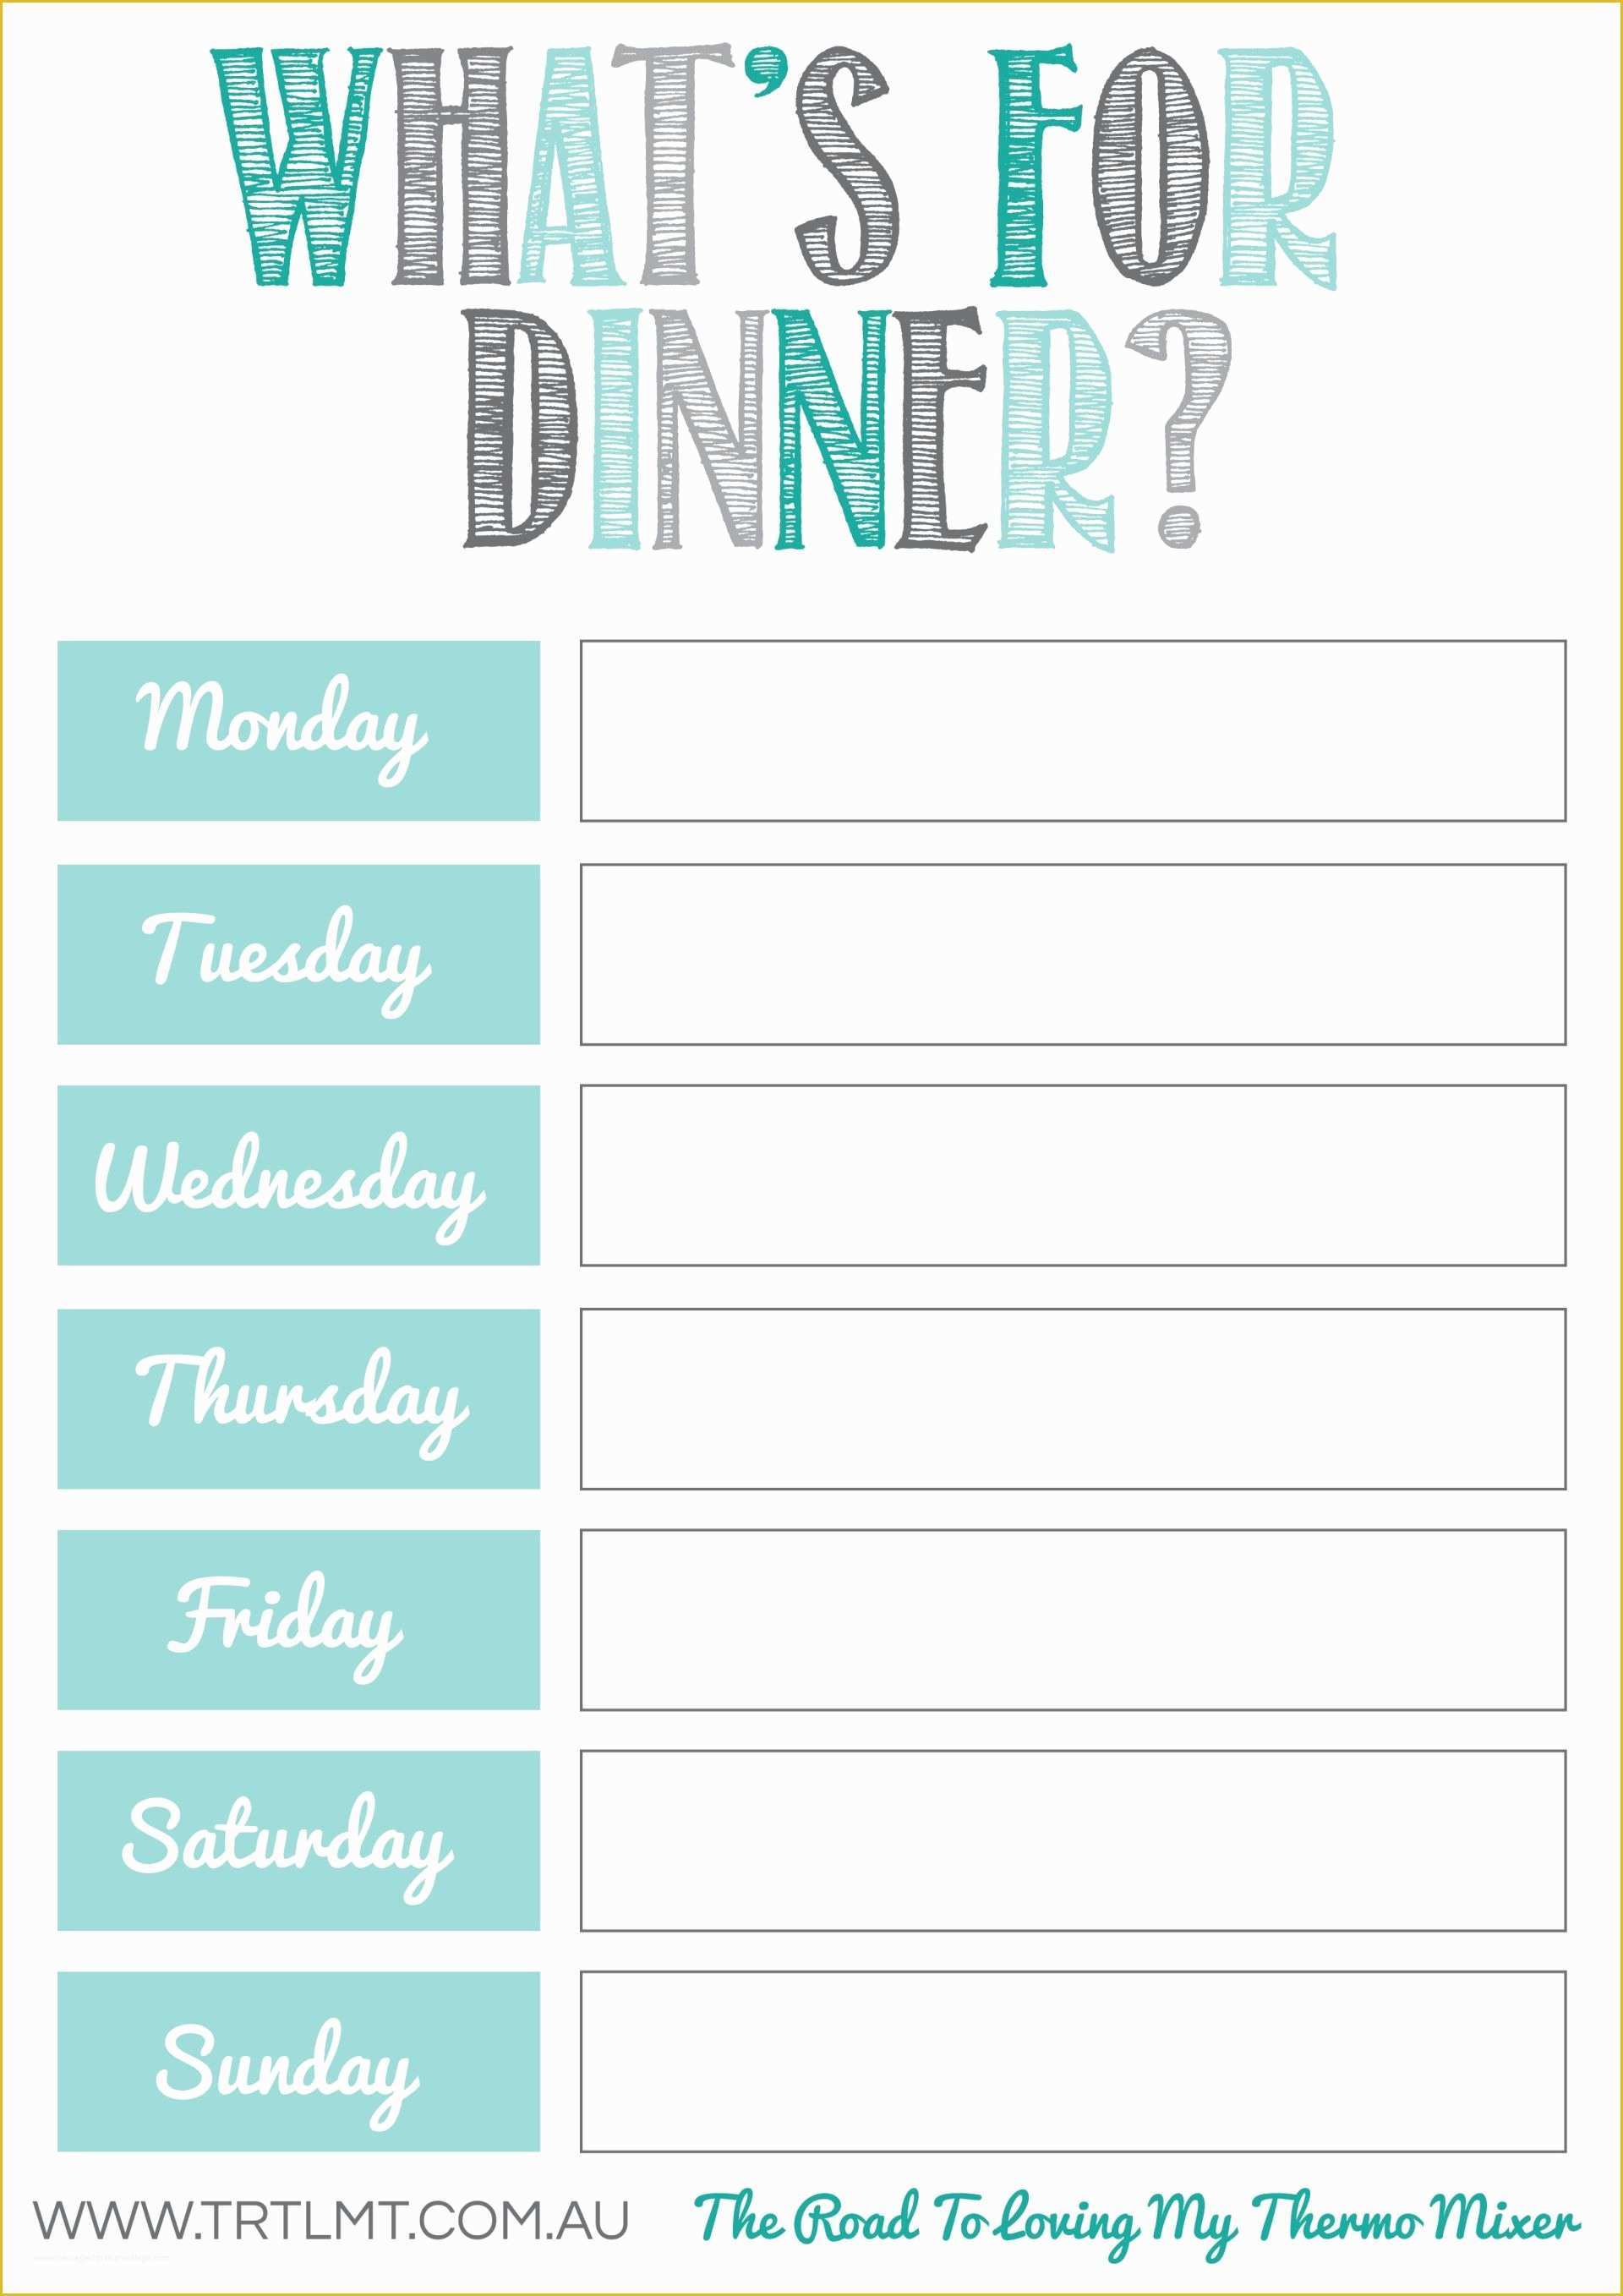 Free Printable Lunch Menu Template Of What S for Dinner 2 Fb organization